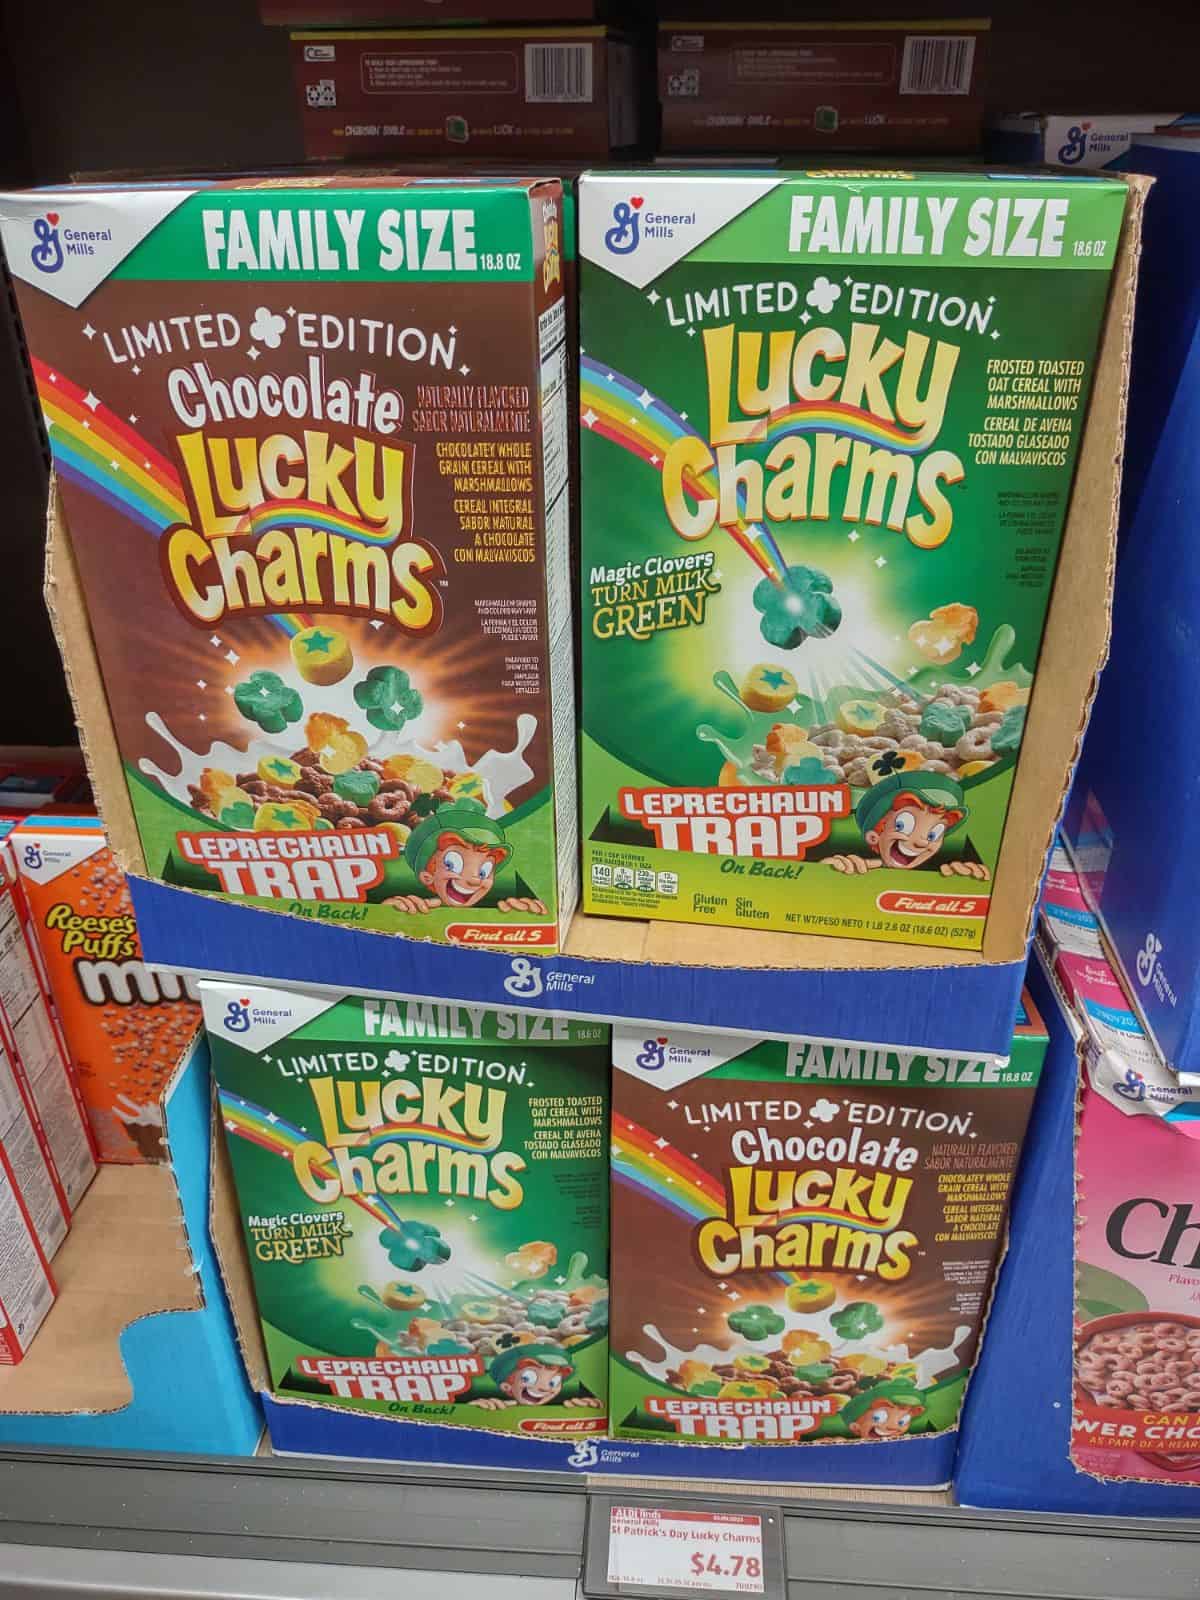 Boxes of Limited edition Chocolate and regular Lucky Charms cereal.